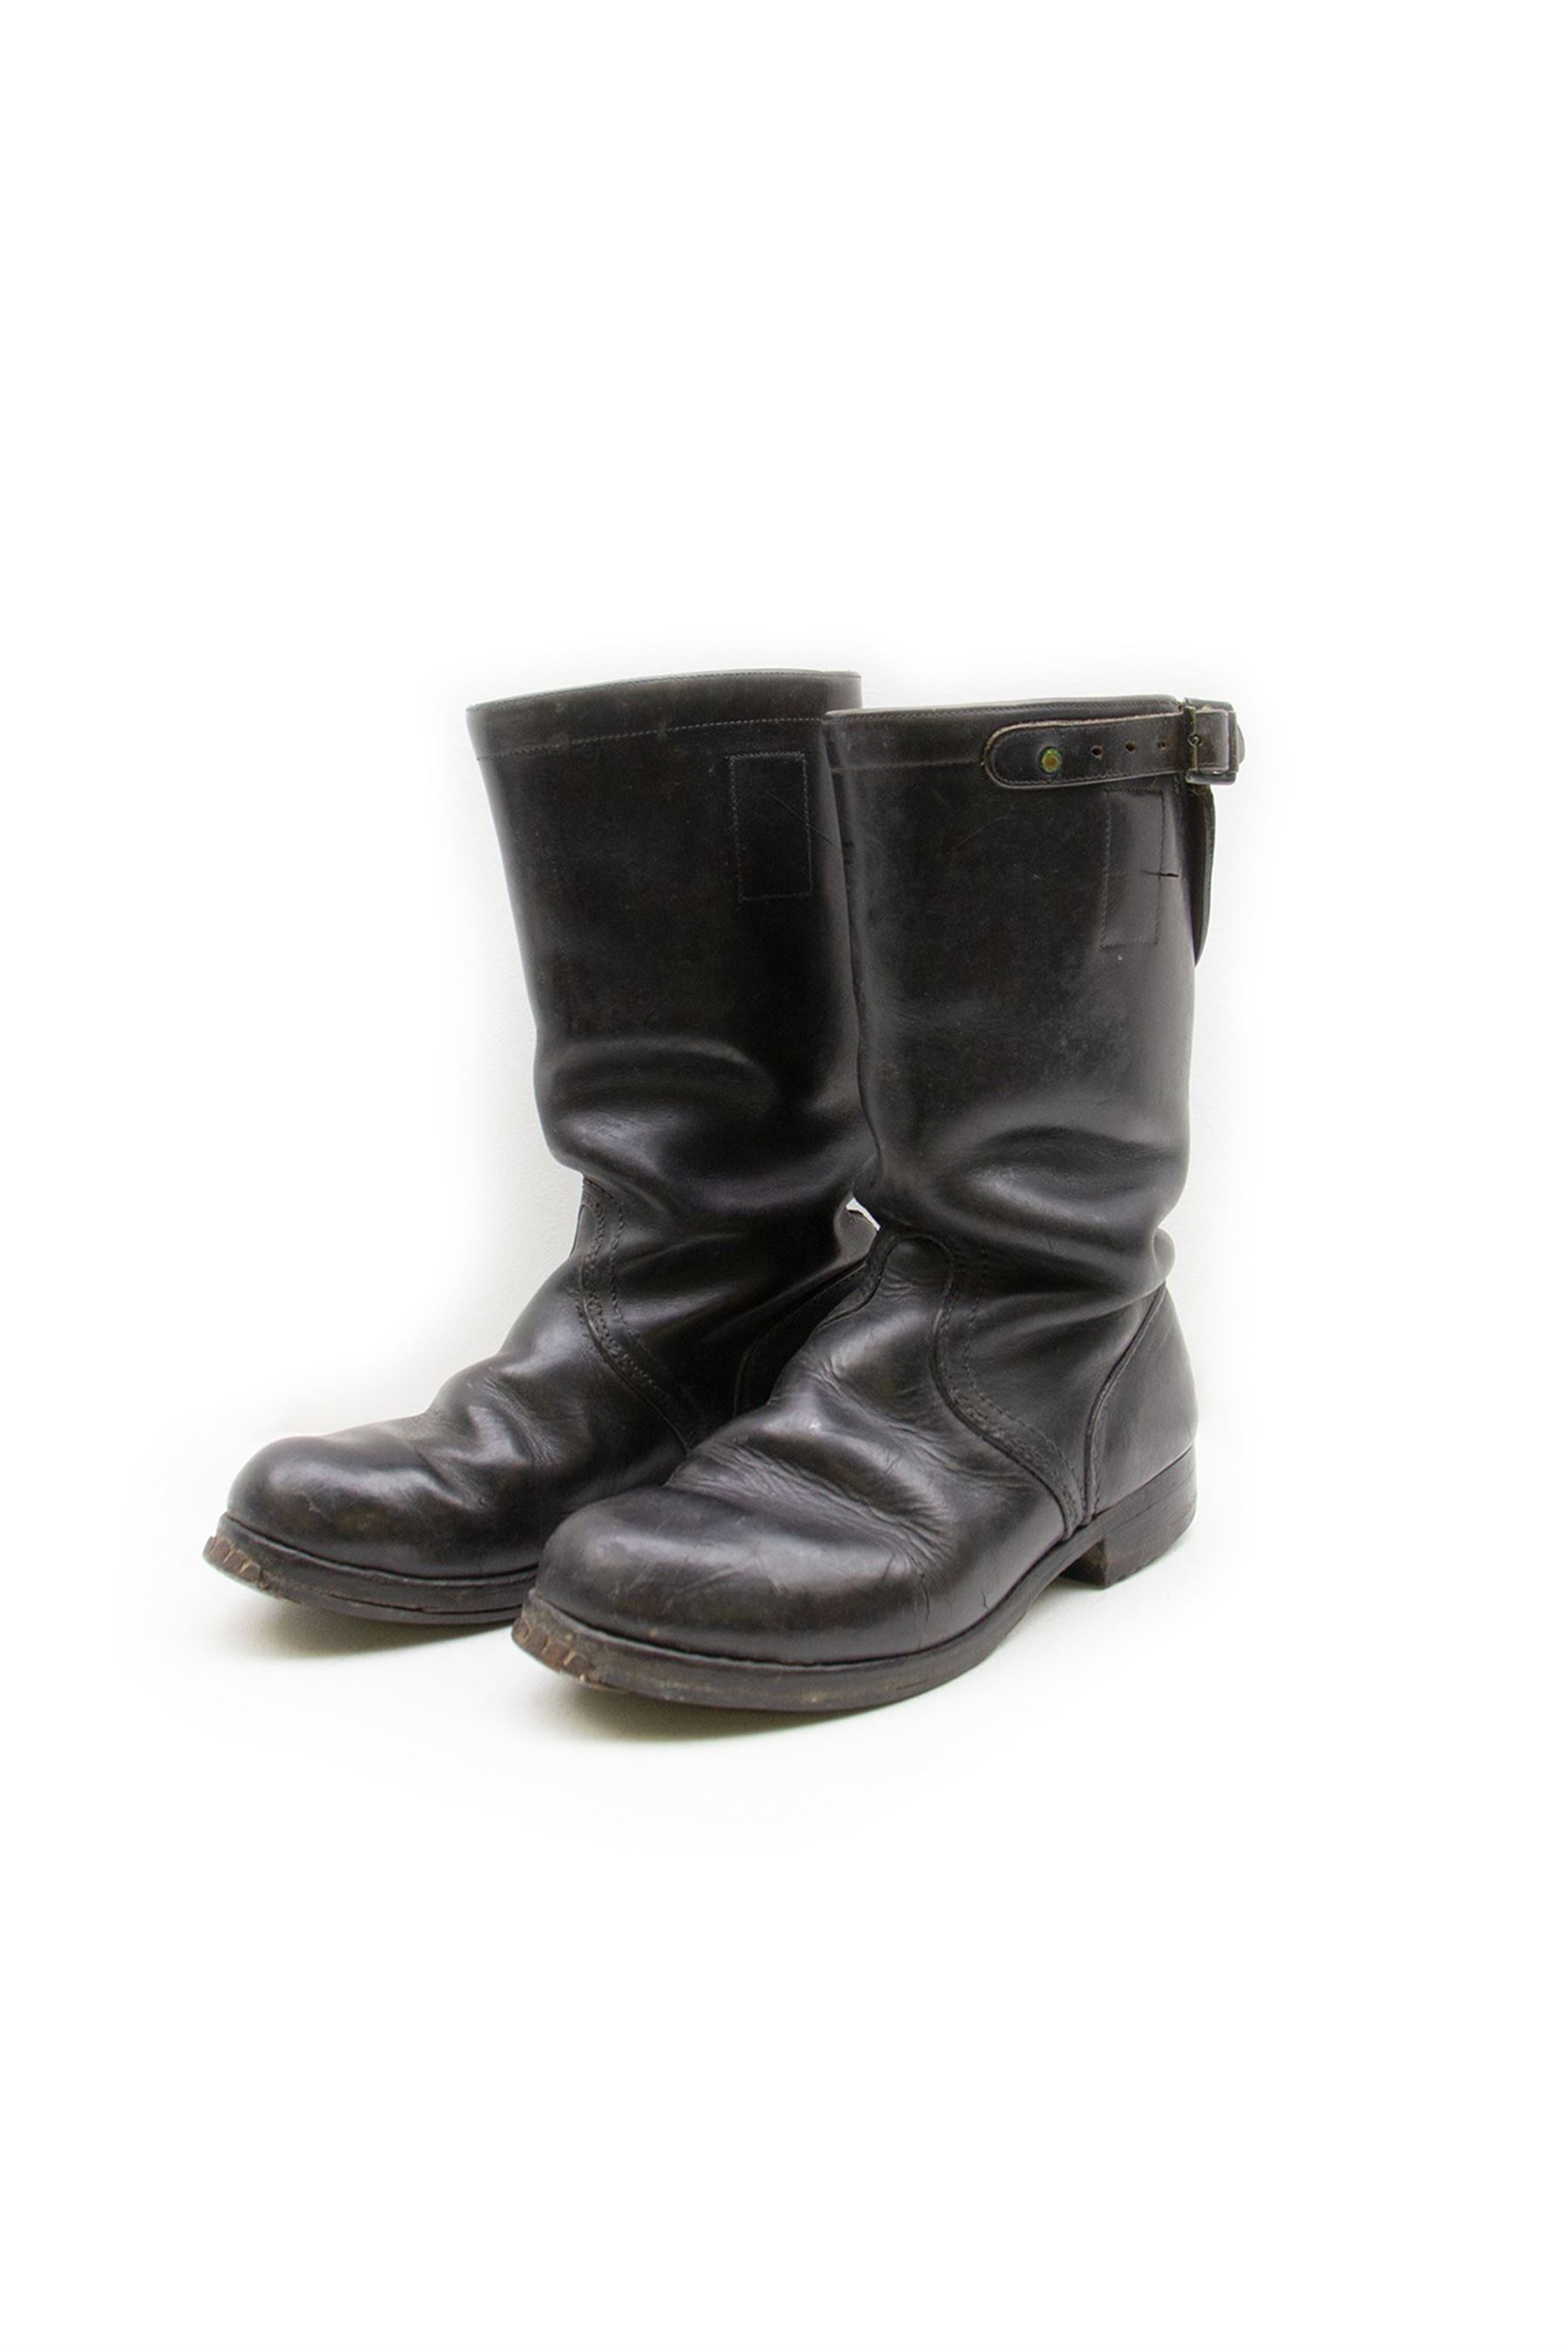 WWII German pair of black leather parade/jack boots with adjustable calf straps; both stamped Contin